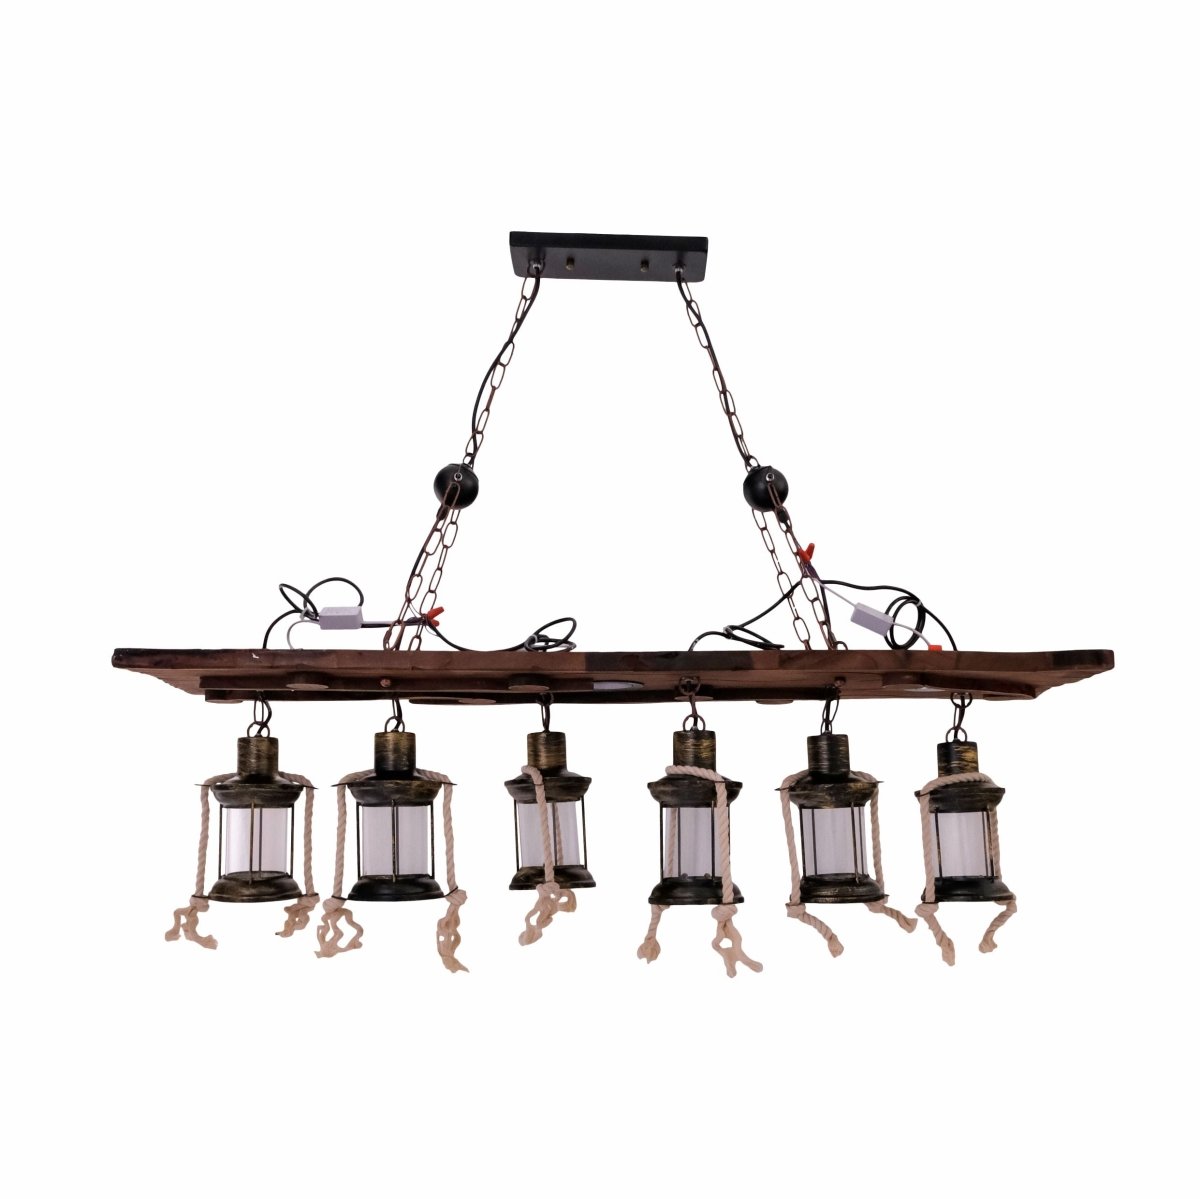 Main image of Sailor Wood Board Marine Island Chandelier with 6xE27 Lamp and 3 LED Light | TEKLED 150-18101